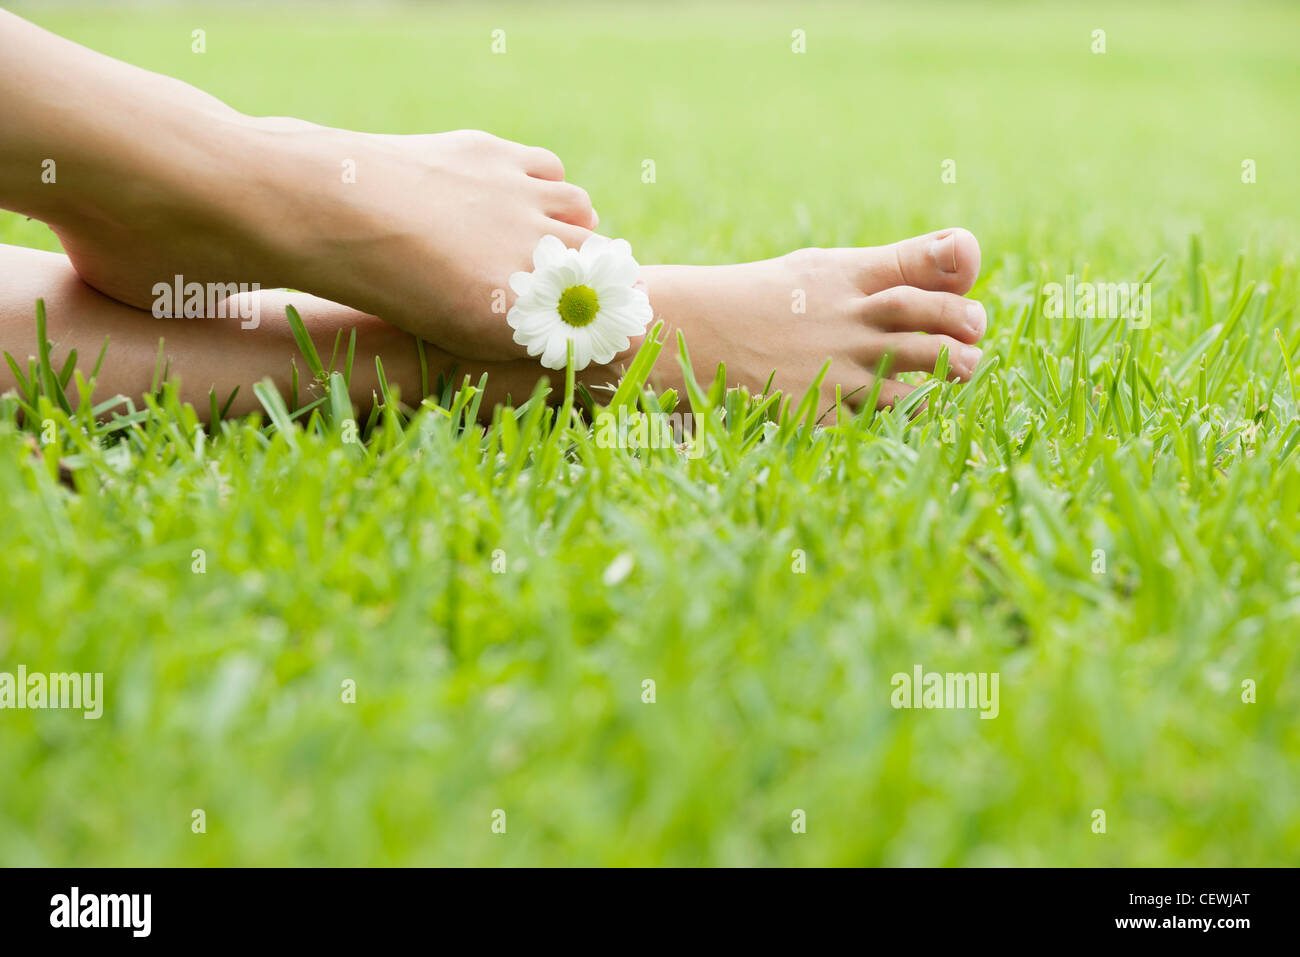 Holding flower between toes Stock Photo